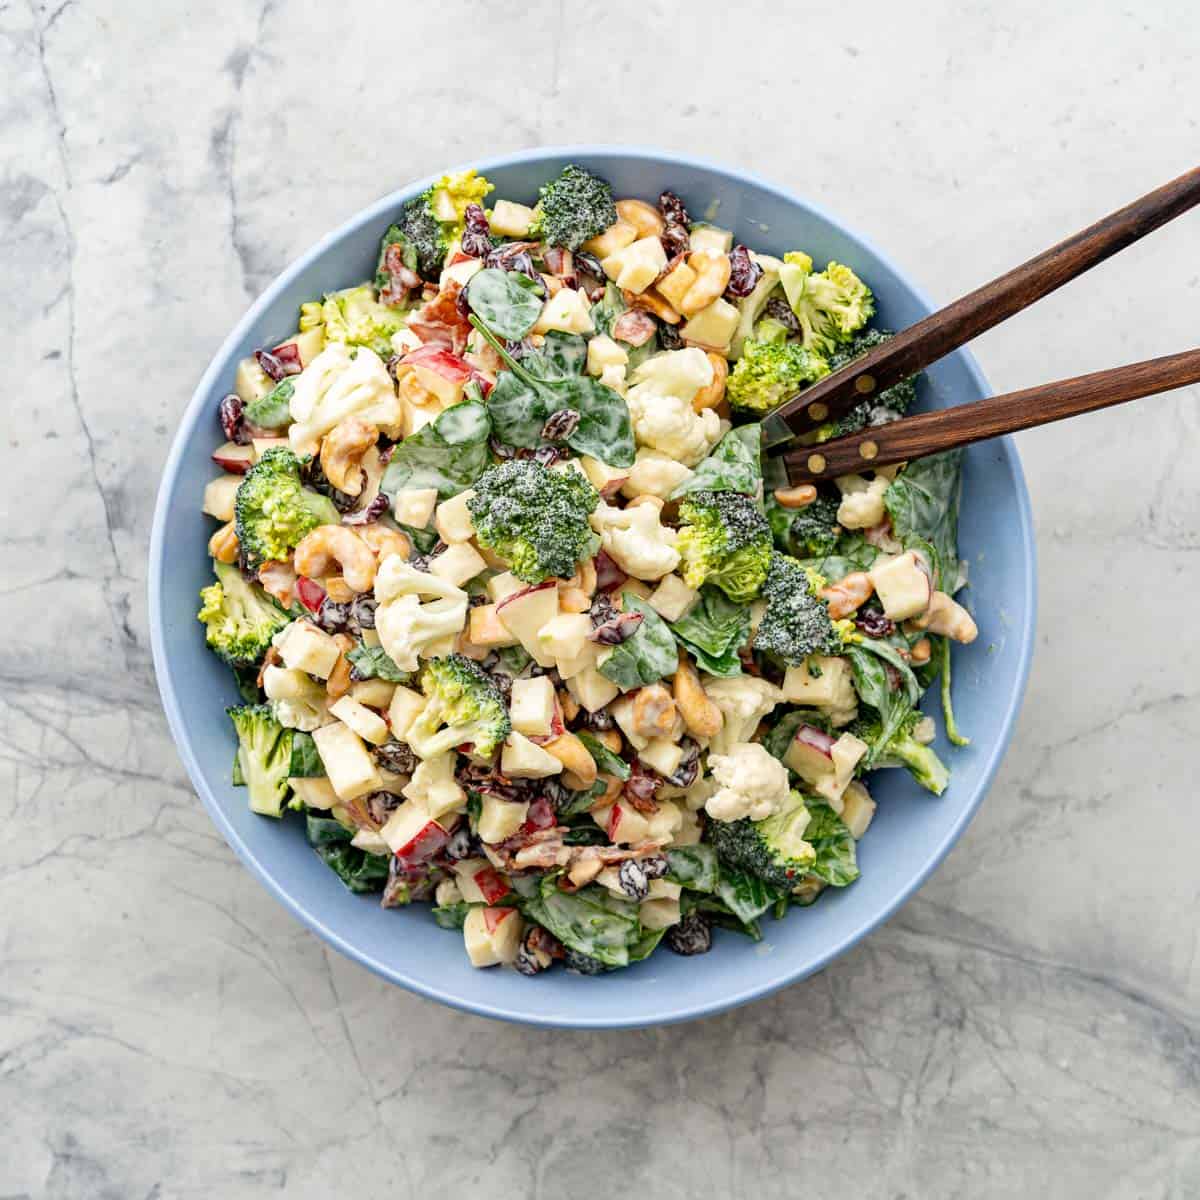 A big blue salad bowl filled with apple spinach broccoli cauliflower raisins and cashews, topped with creamy salad dressing, with wood tongs in bowl.